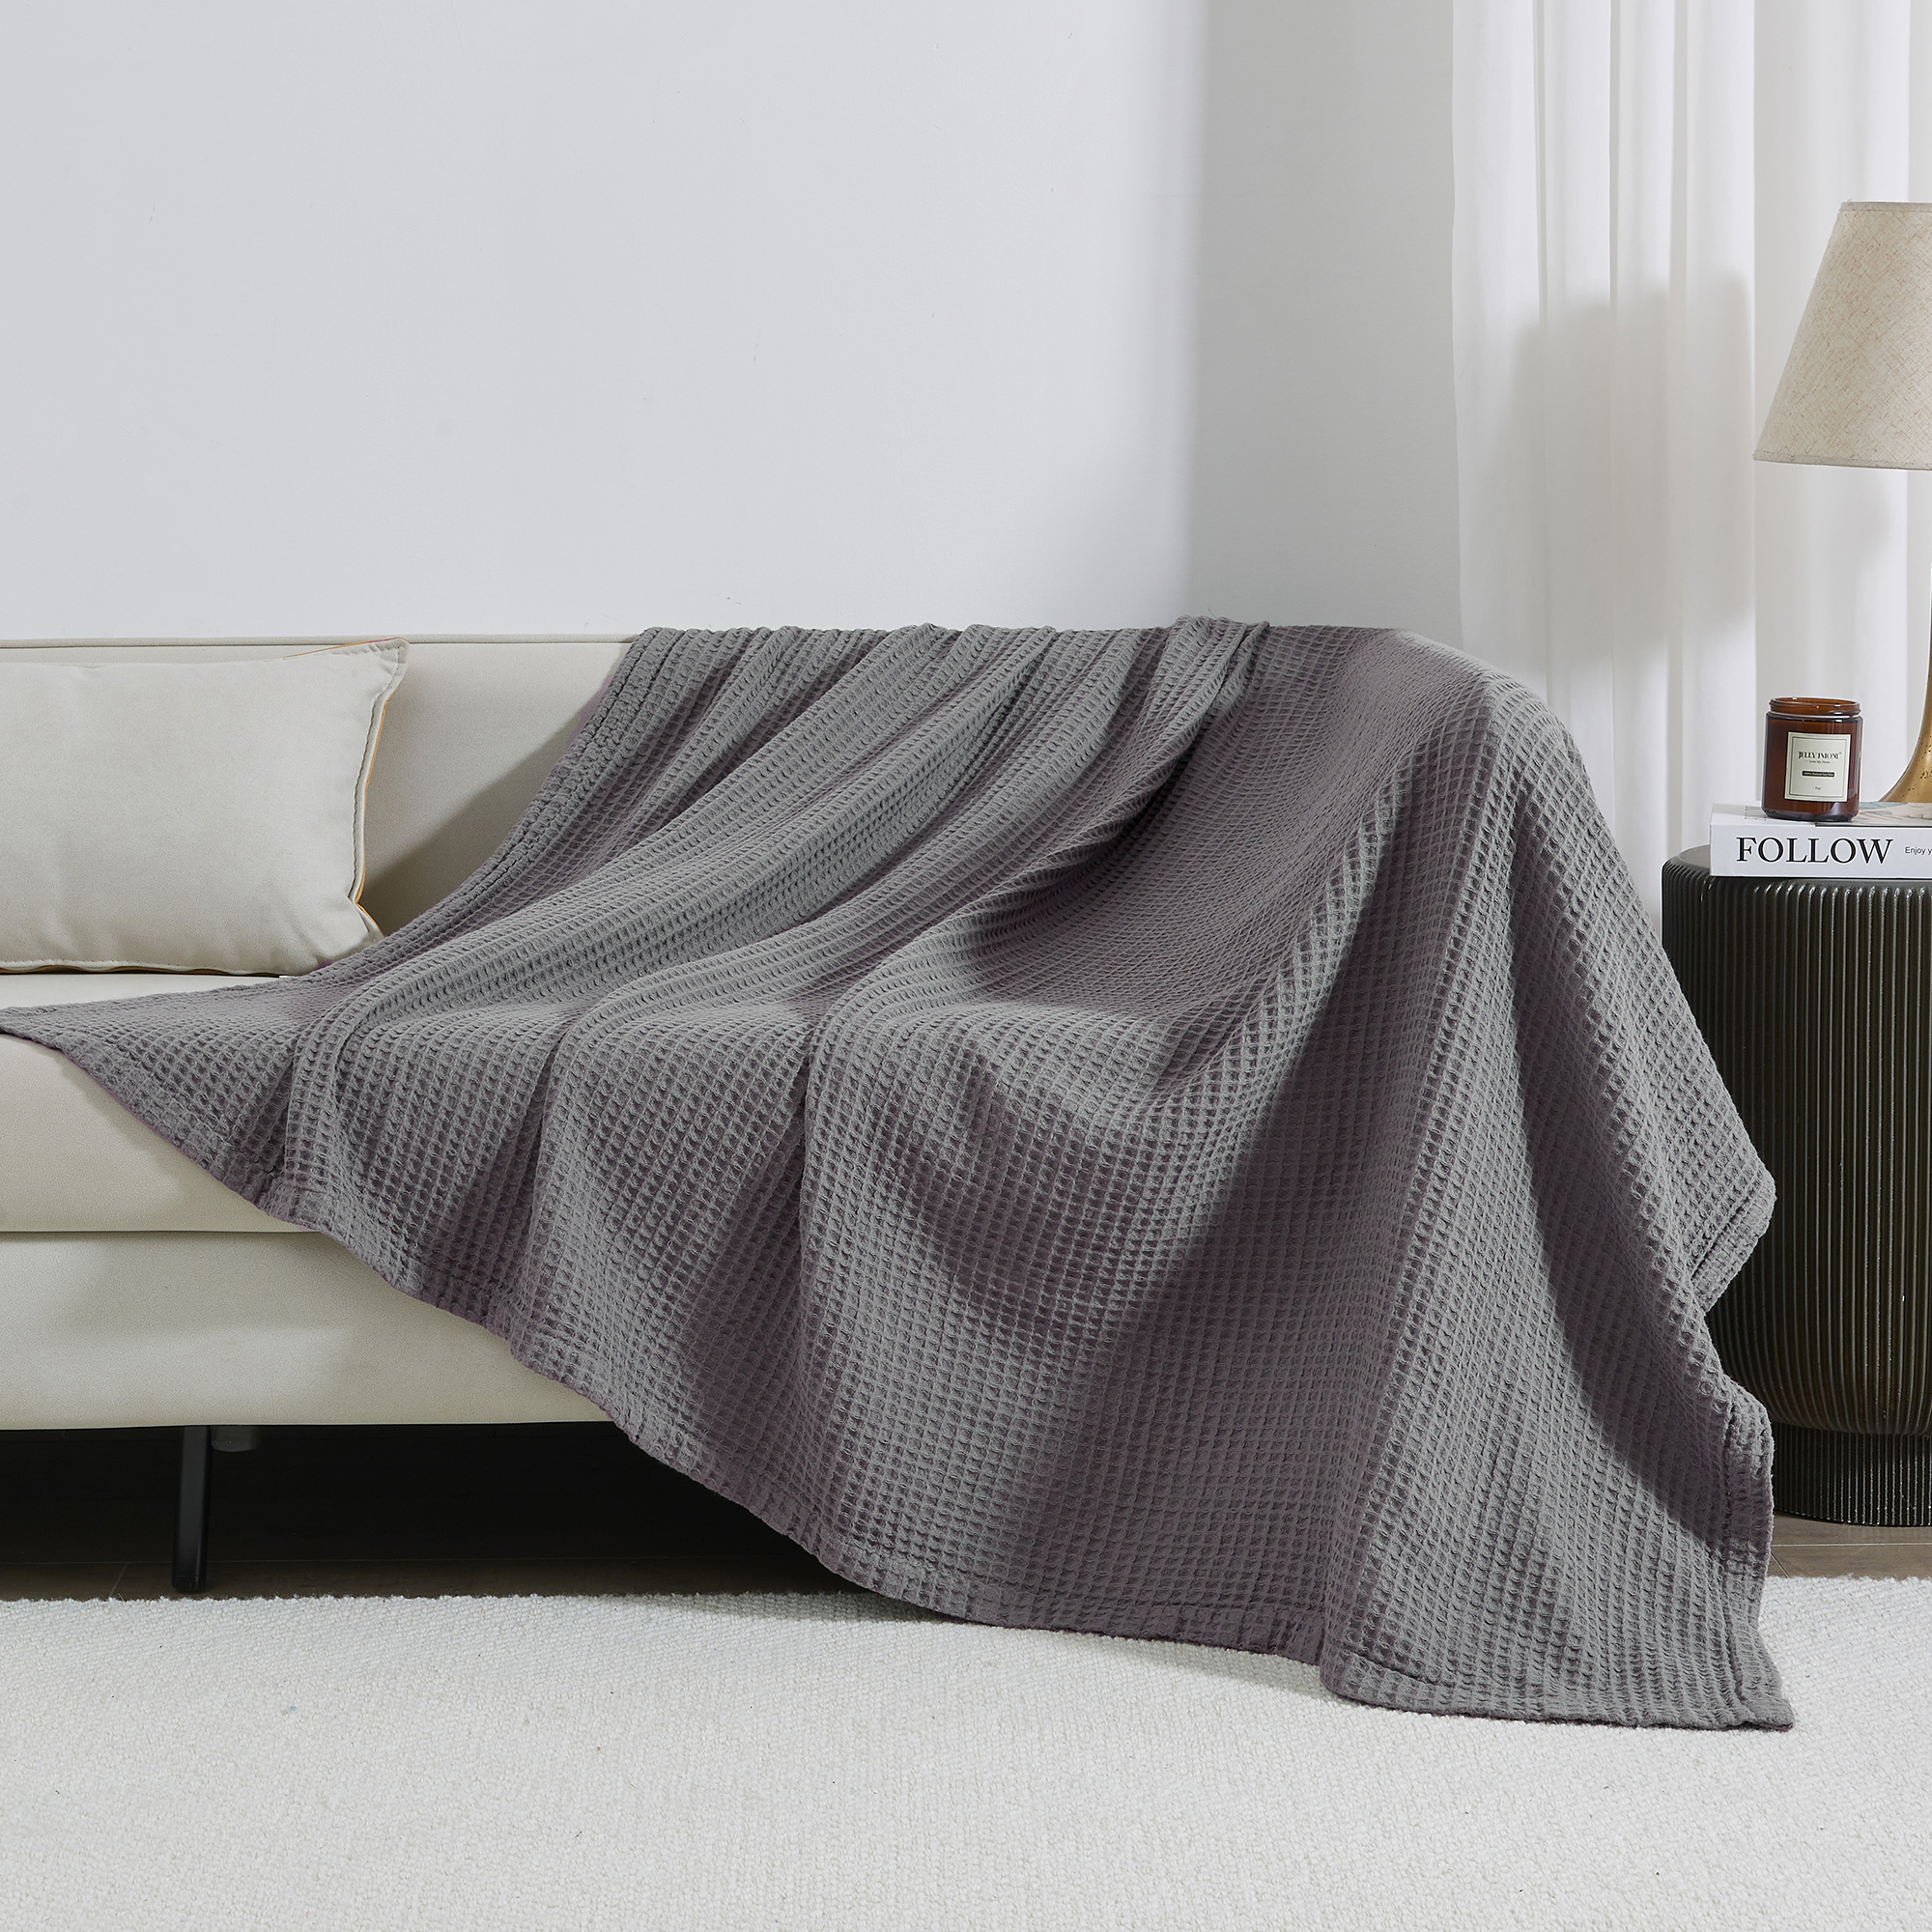 Great Bay Home 100% Cotton Waffle Weave Lightweight Bed Blanket (Twin, Dark Grey) - image 3 of 6